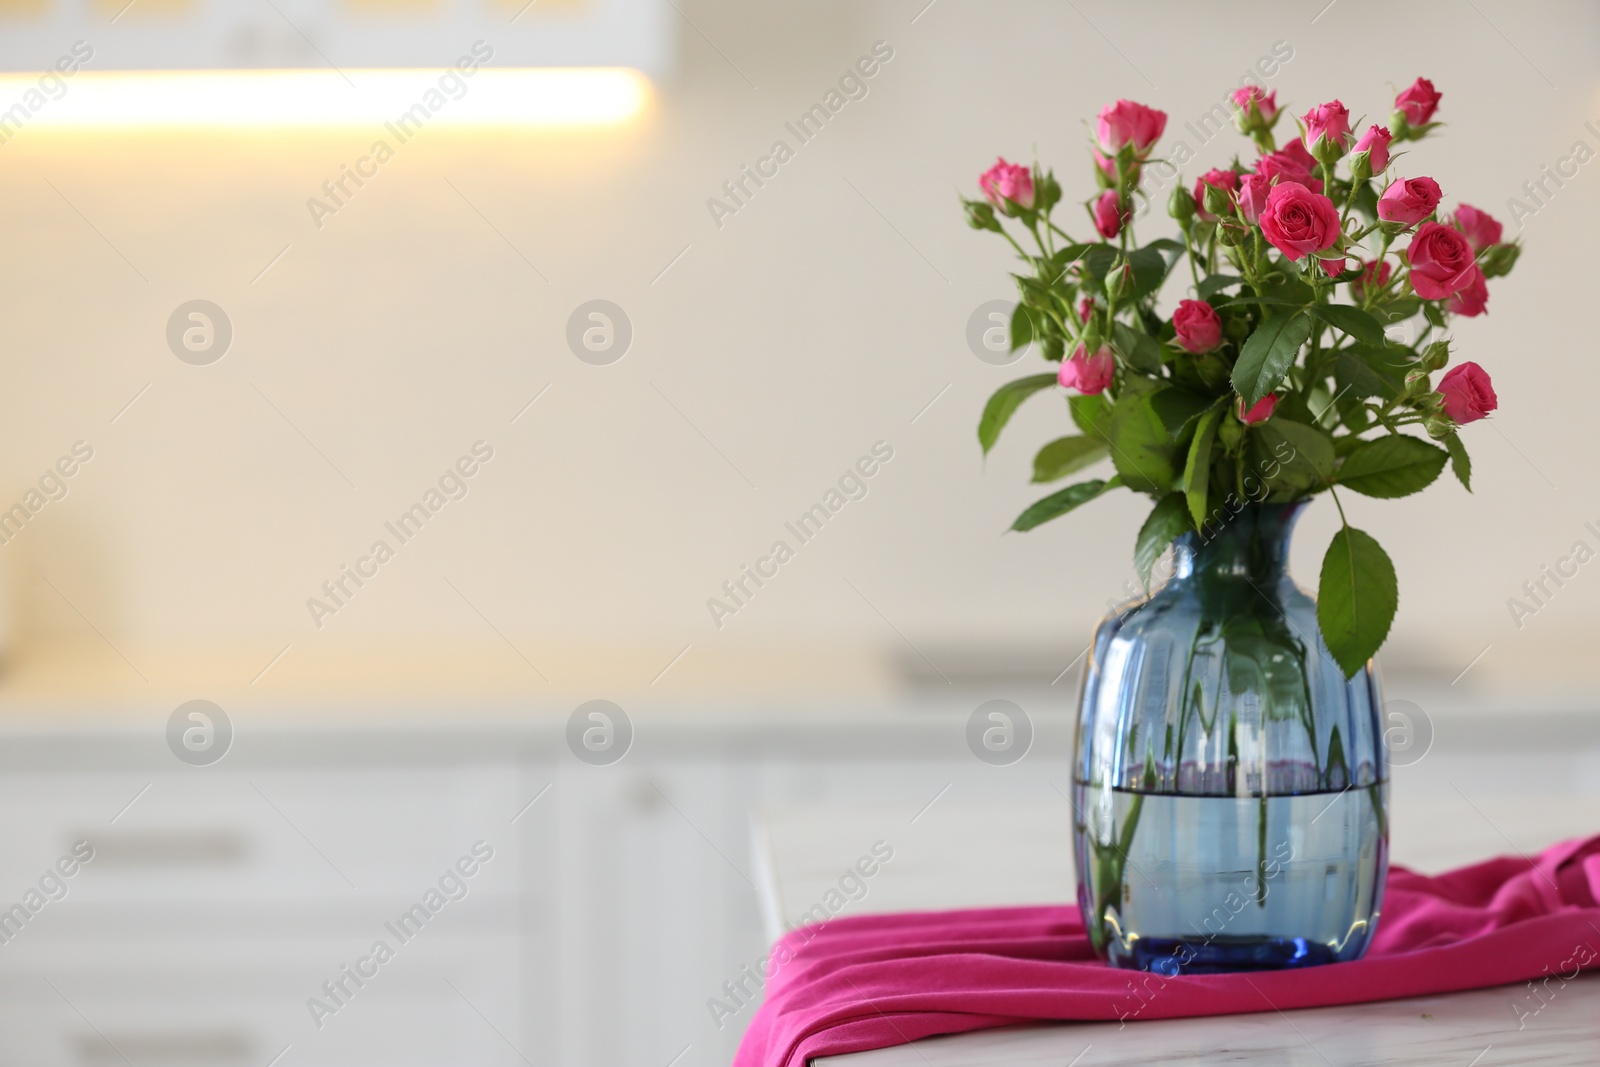 Photo of Glass vase with fresh flowers and towel on table in kitchen. Space for text